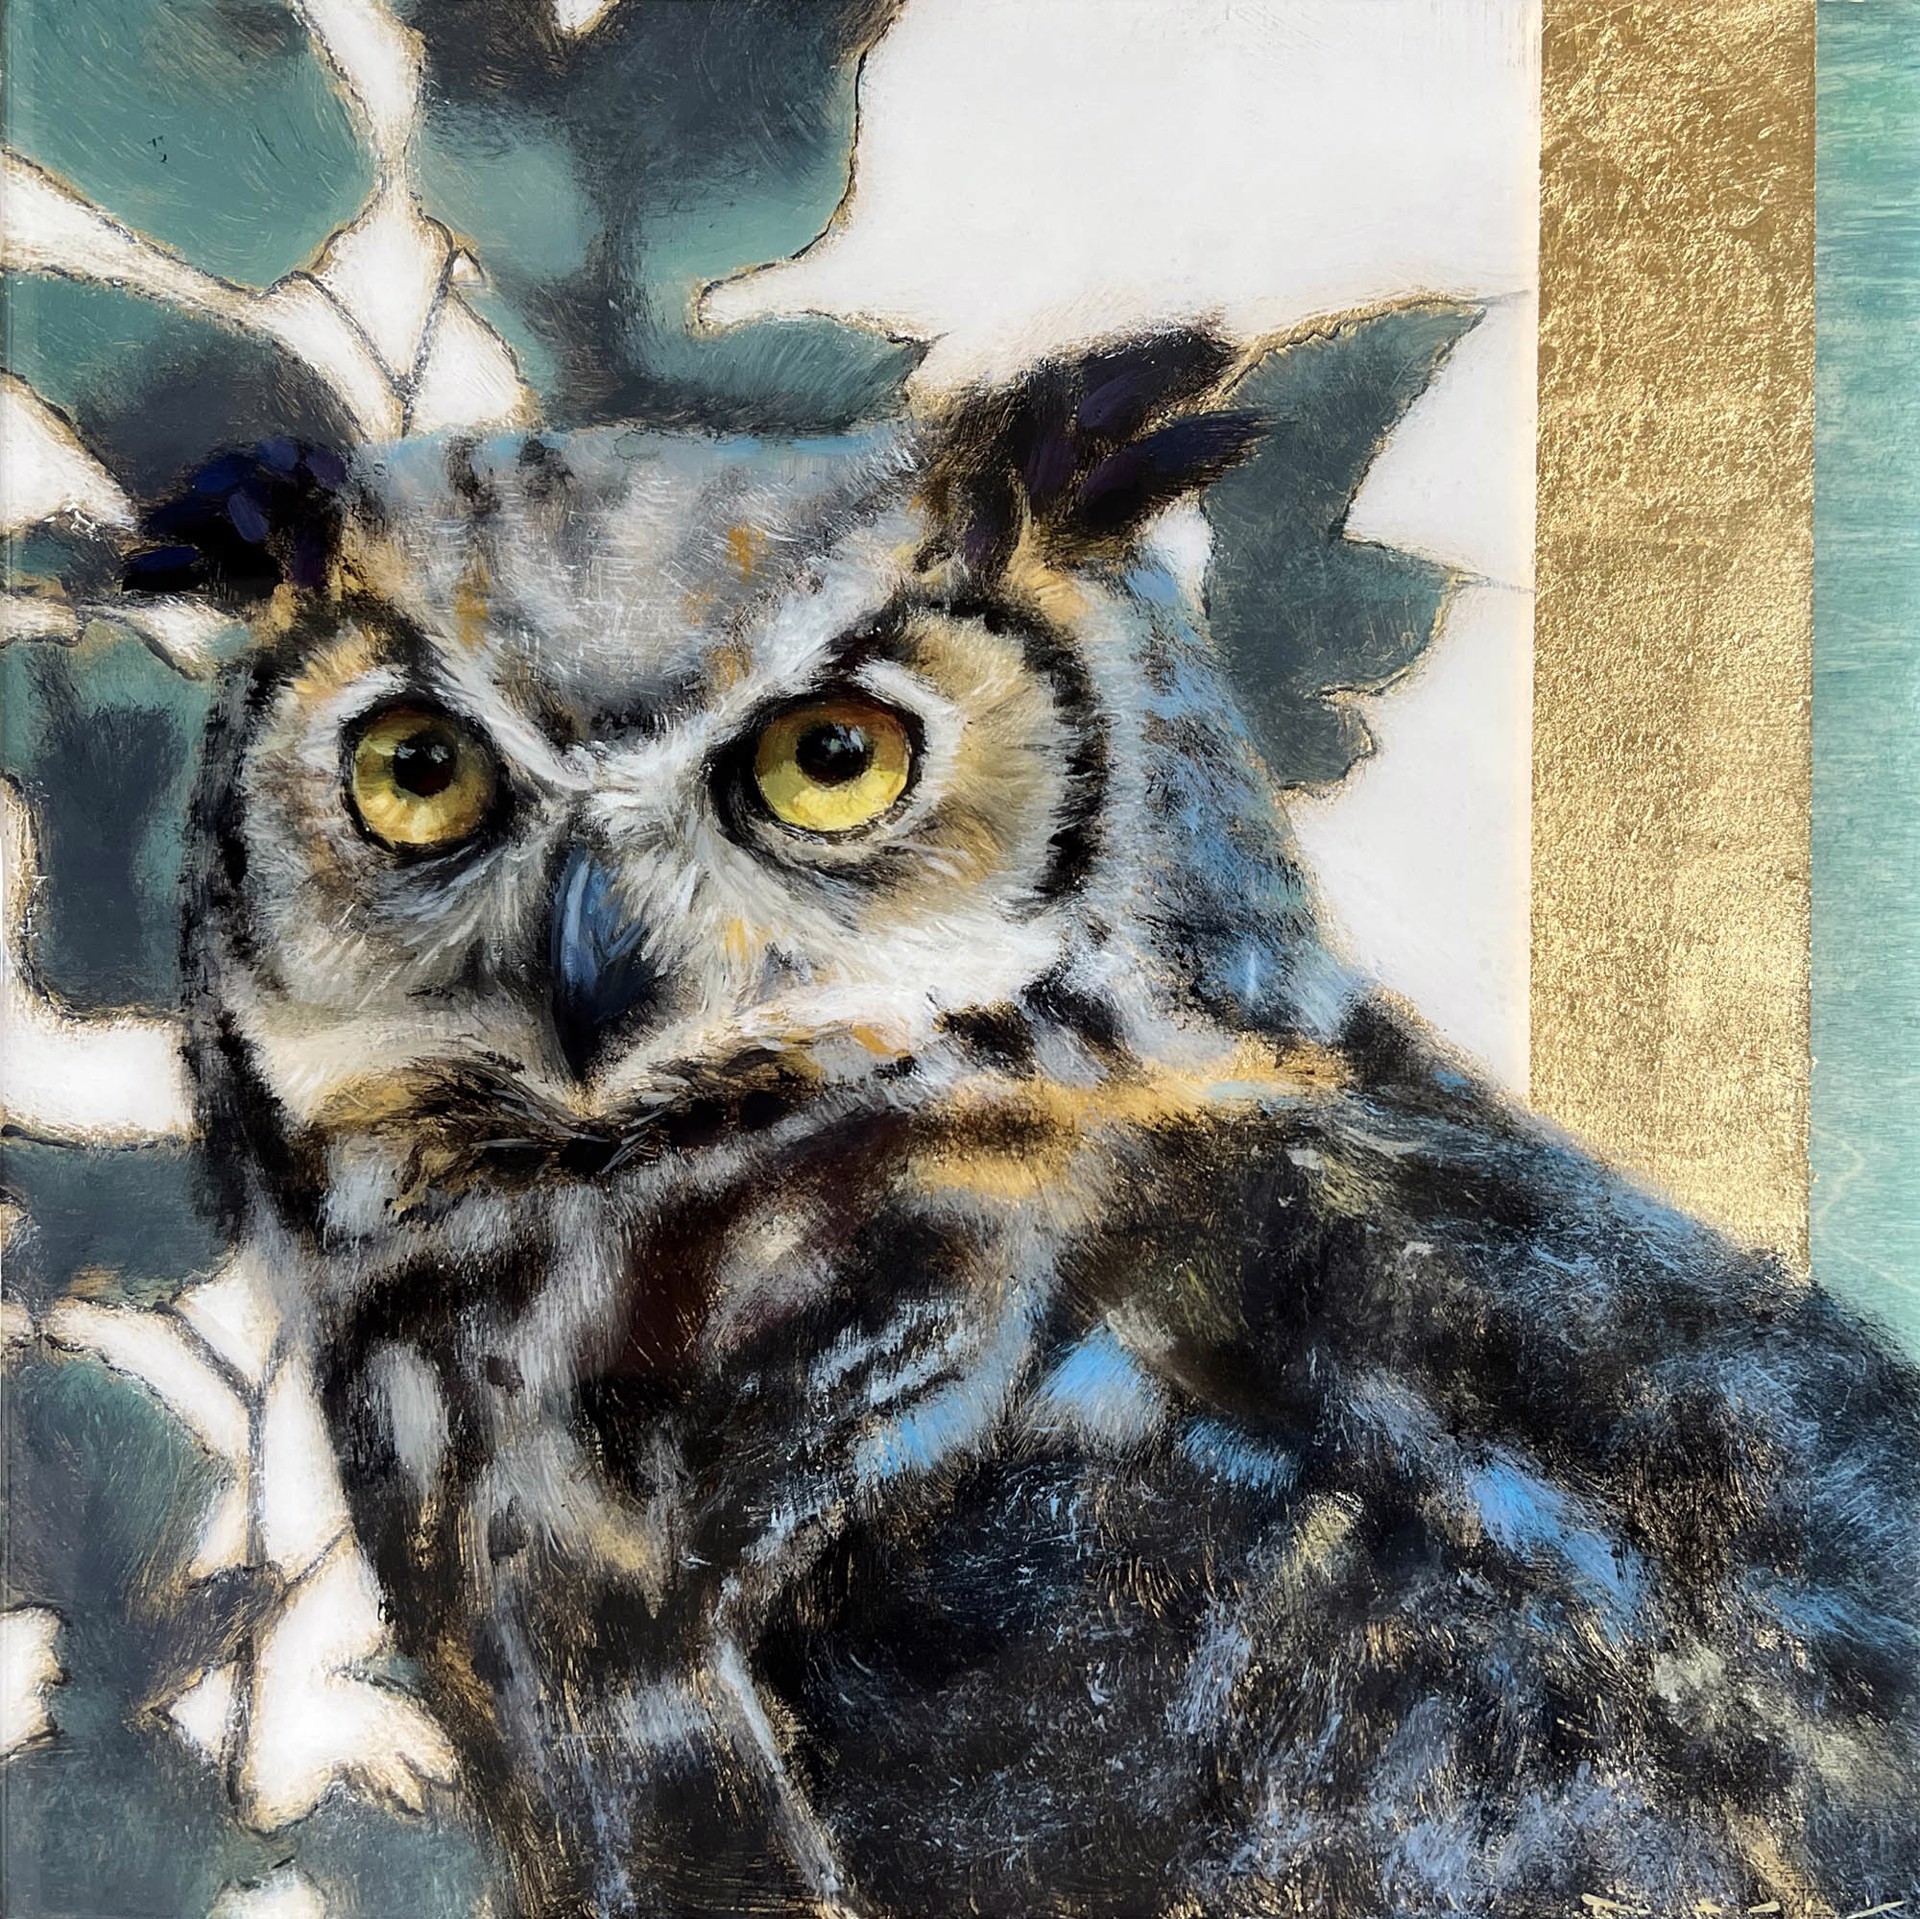 Original Acrylic Painting featuring An Owl Bust Over Abstract Background With Botanical Motifs And Gold Detail